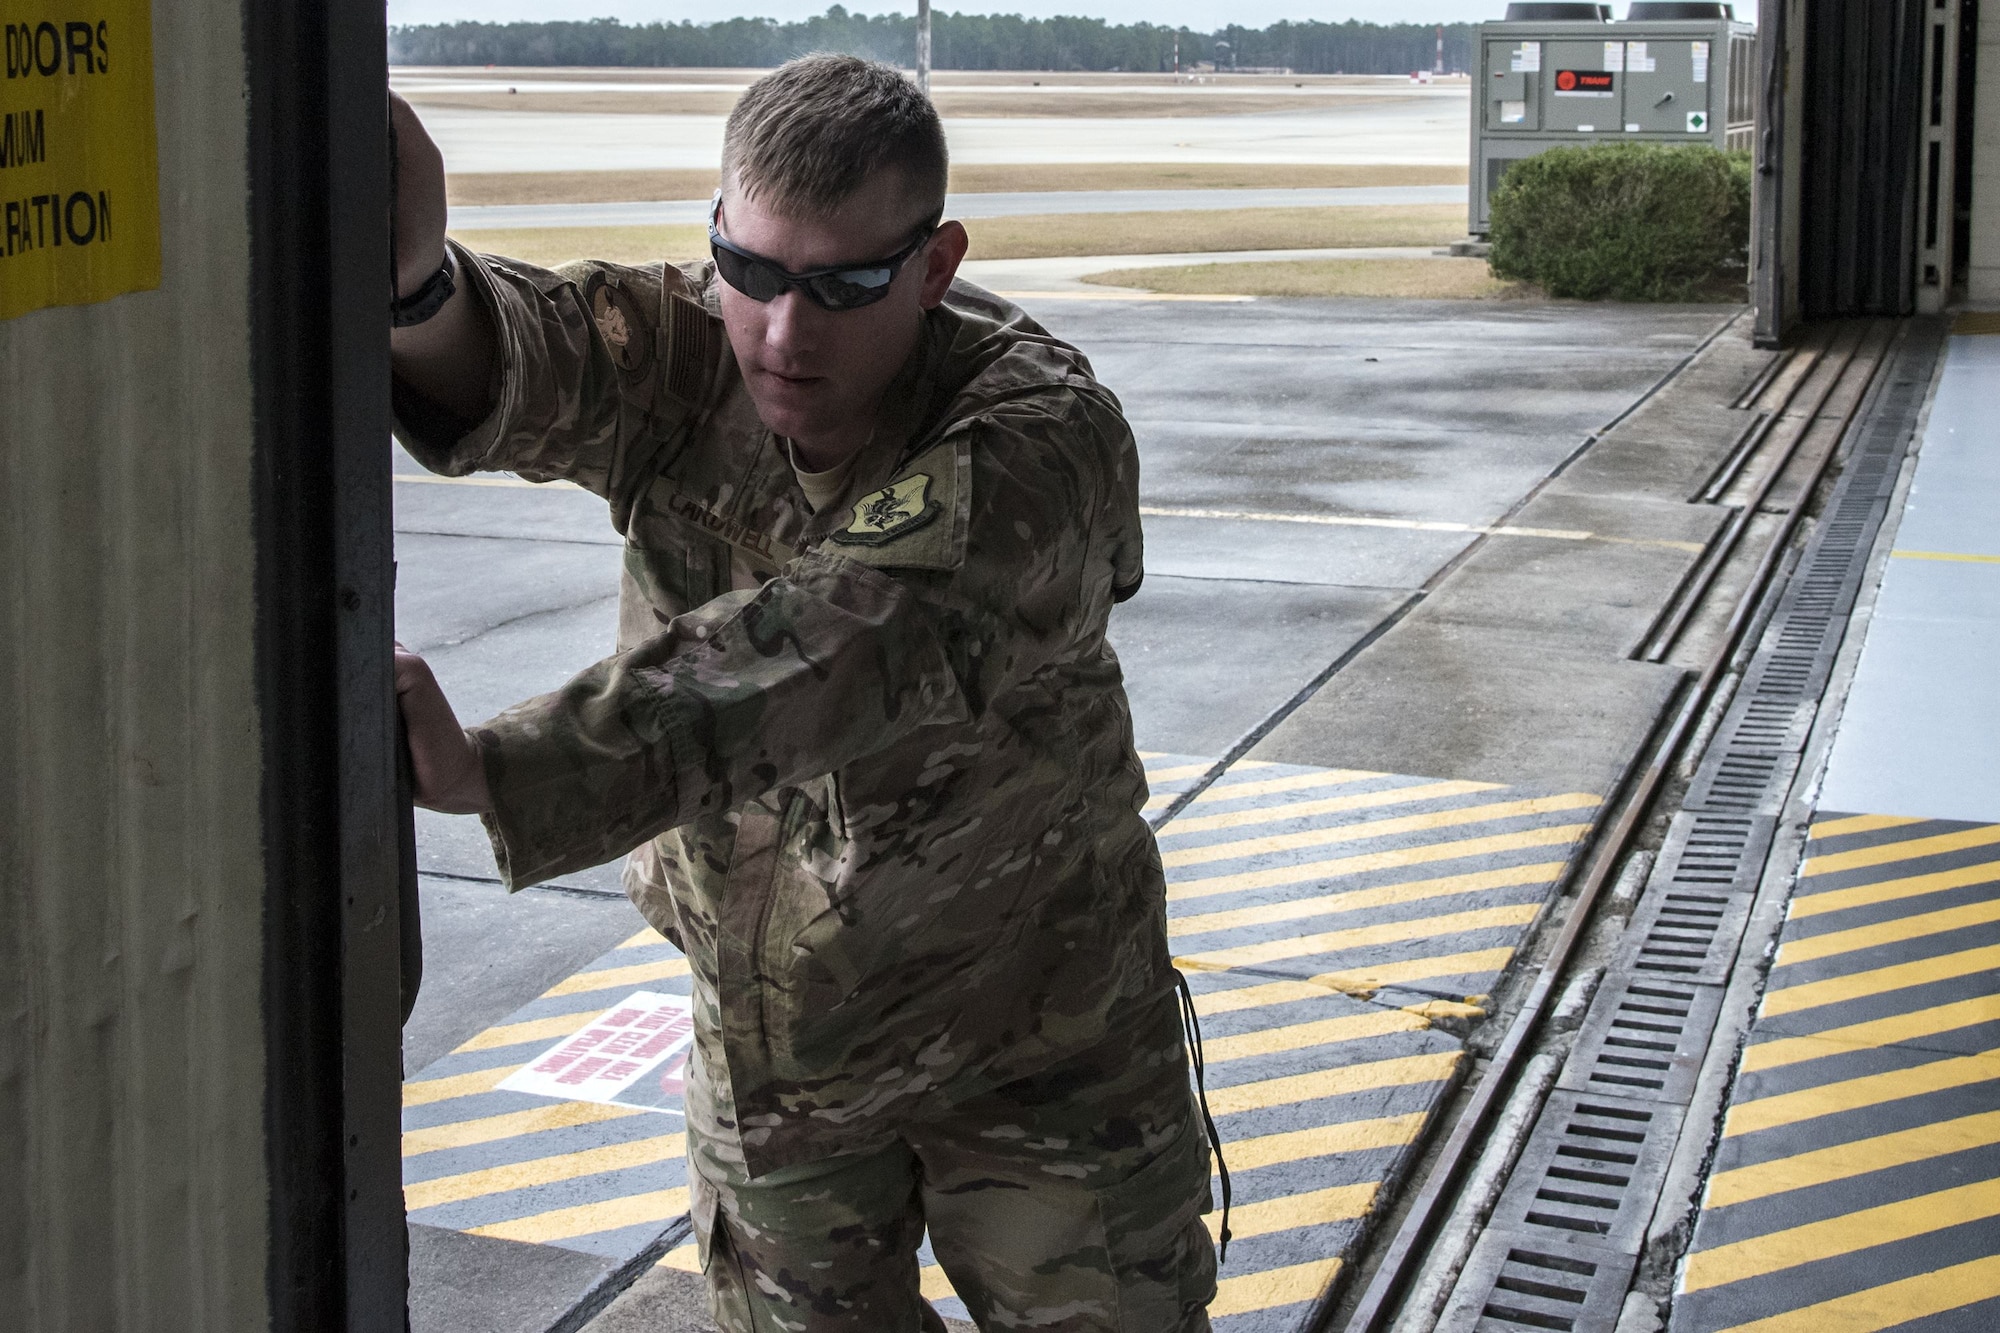 Tech Sgt. Jesse Cardwell, 723d Aircraft Maintenance Squadron (AMXS) HH-60G Pave Hawk crew chief, pushes a hangar door open, Jan. 22, 2018, at Moody Air Force Base, Ga. From 16-25 Jan., Airmen from the 723d AMXS performed 216 hours of maintenance on an HH-60 after it returned to Moody following 350 days of depot maintenance at Naval Air Station (NAS) Jacksonville. While at NAS Jacksonville, the HH-60 underwent a complete structural overhaul where it received new internal and external components along with repairs and updated programming. (U.S. Air Force photo by Airman Eugene Oliver)